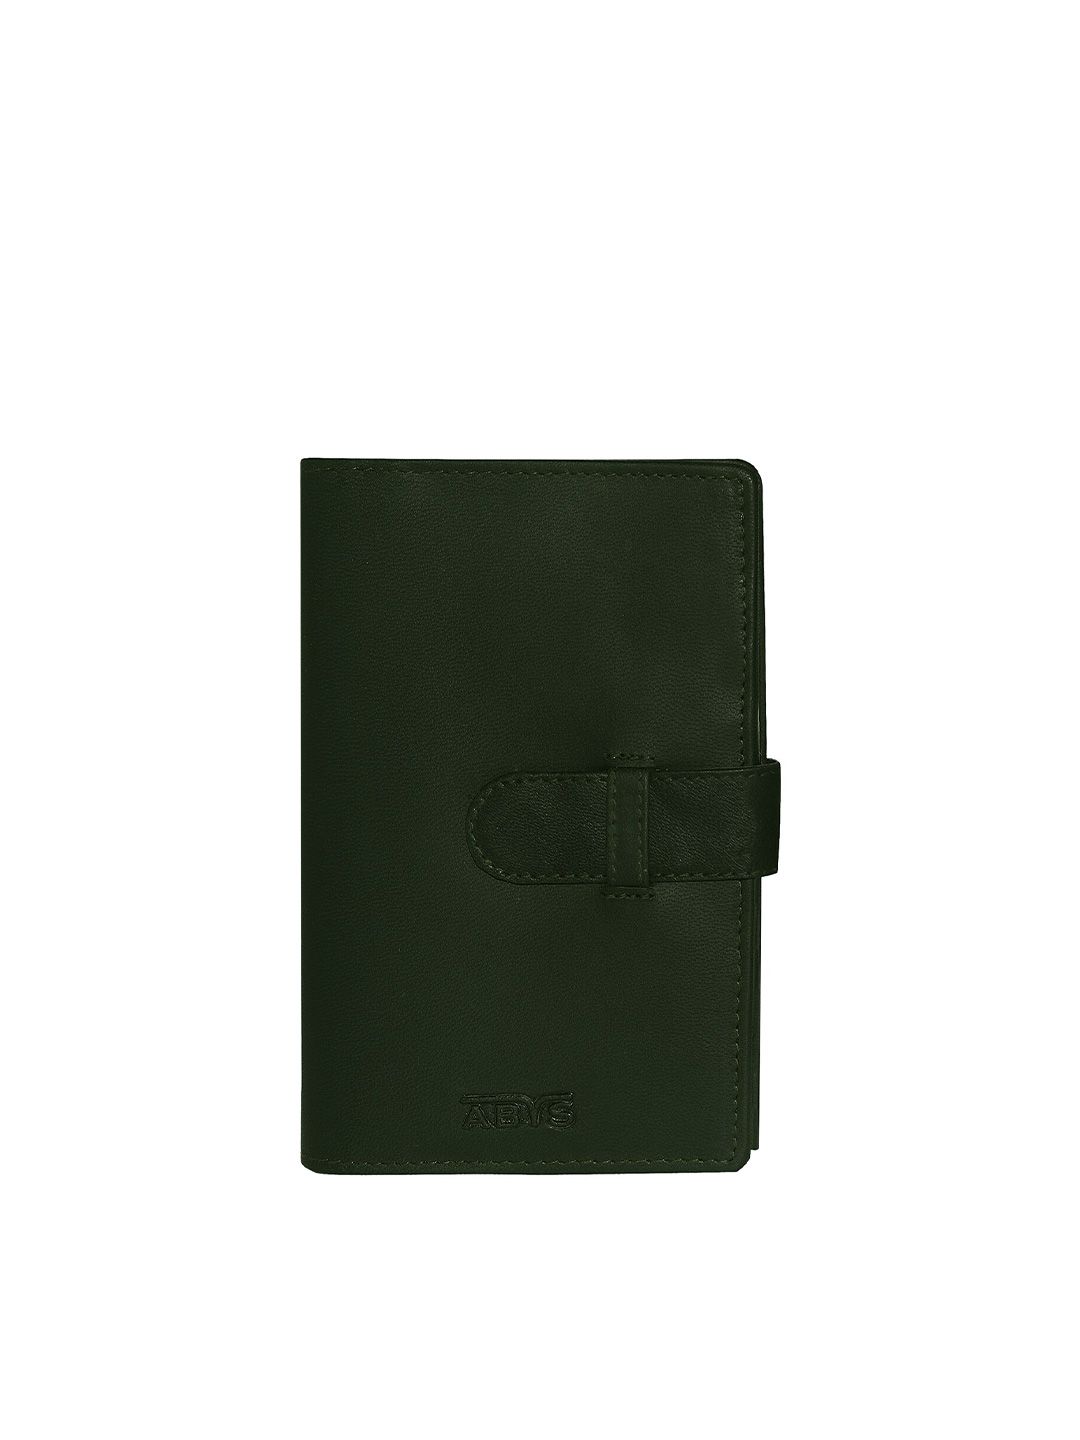 ABYS Unisex Green & Gunmetal-Toned Textured Leather Passport Holder Price in India